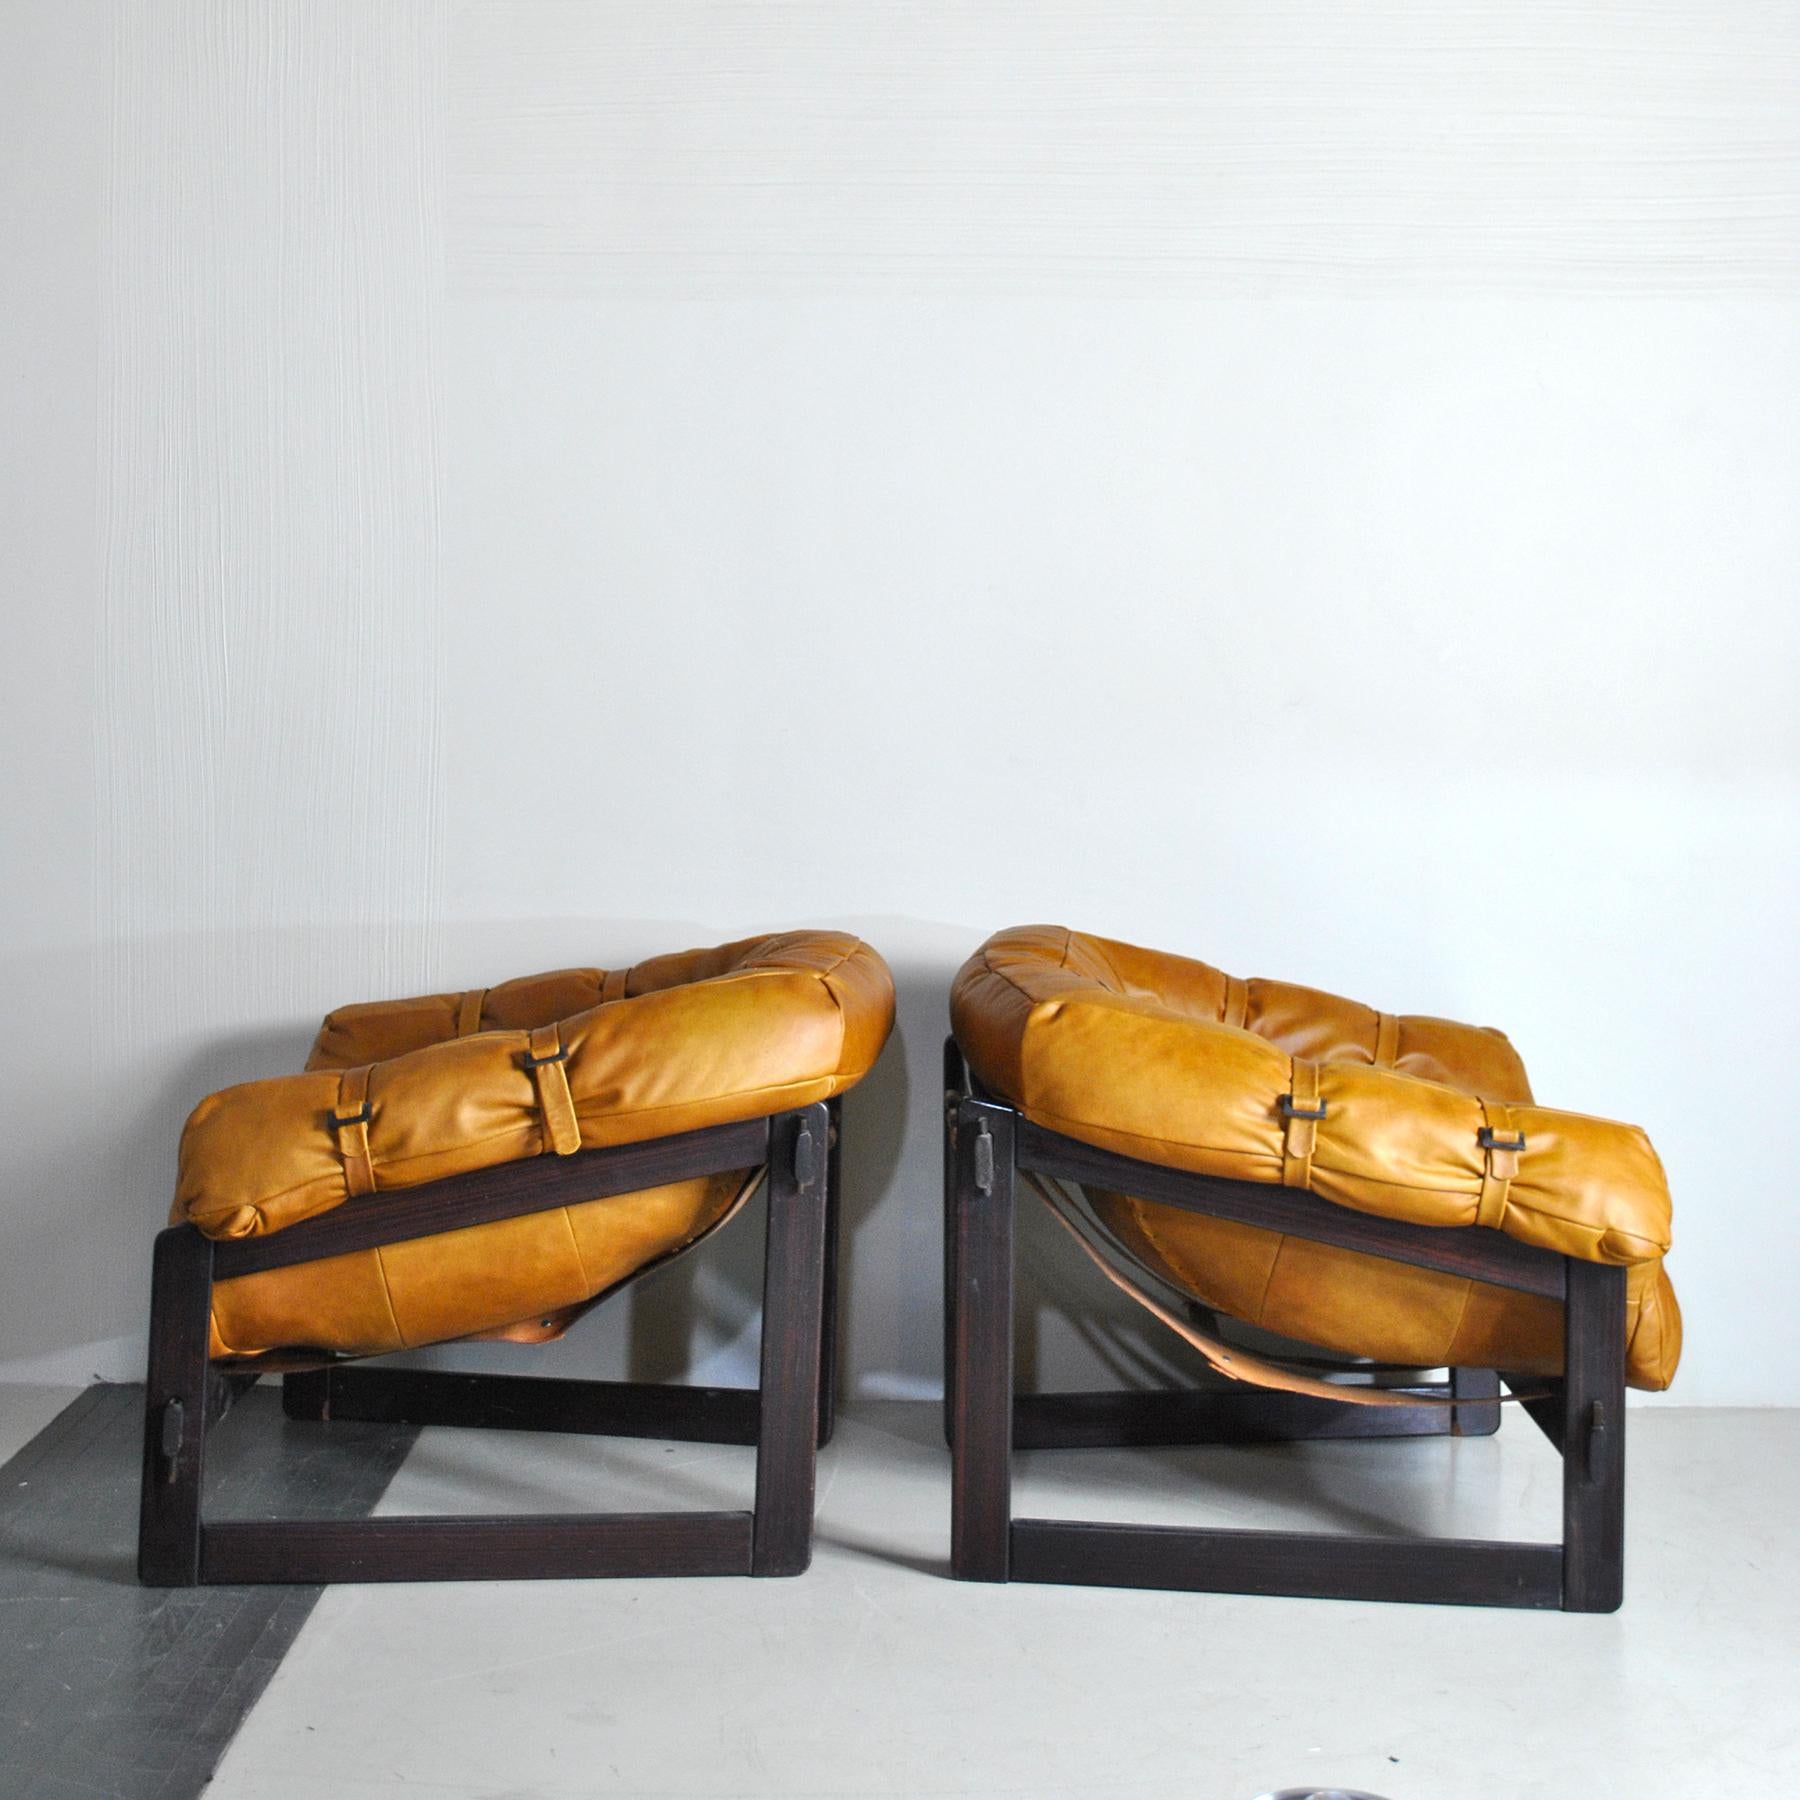 Percival Lafer Pair of Midcentury Brazilian Lounge Chair, 1960s 3